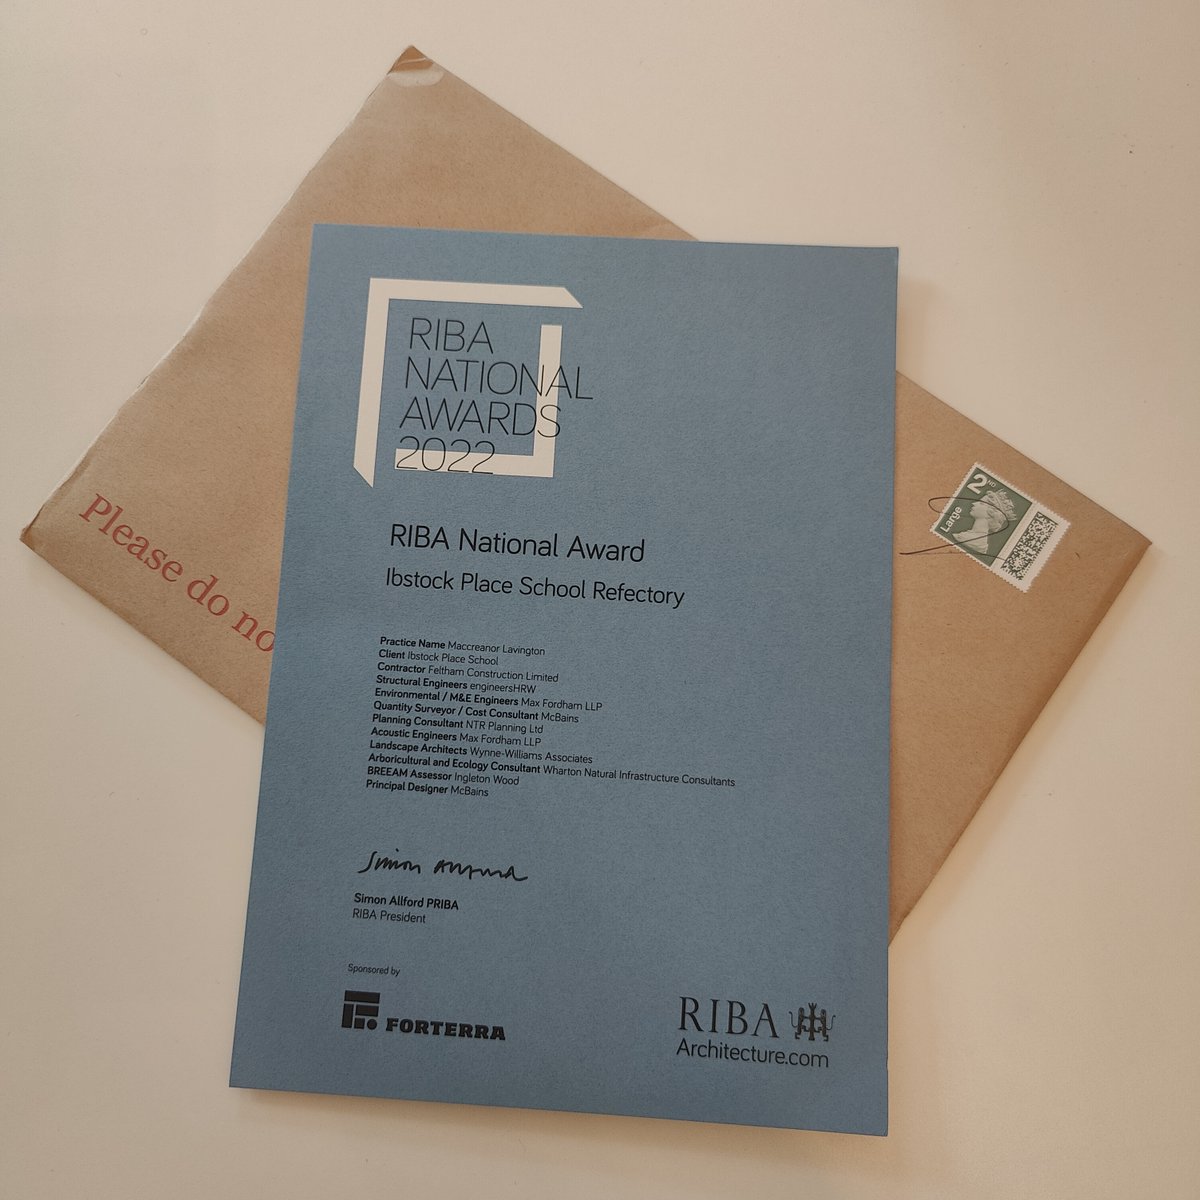 ✉️ We've just received our @RIBA National Award 2022 certificate! 🏆
With thanks to @MaccLav for designing our stunning refectory
#ibstockplaceschool #ribanationalaward #riba #londonarchitecture